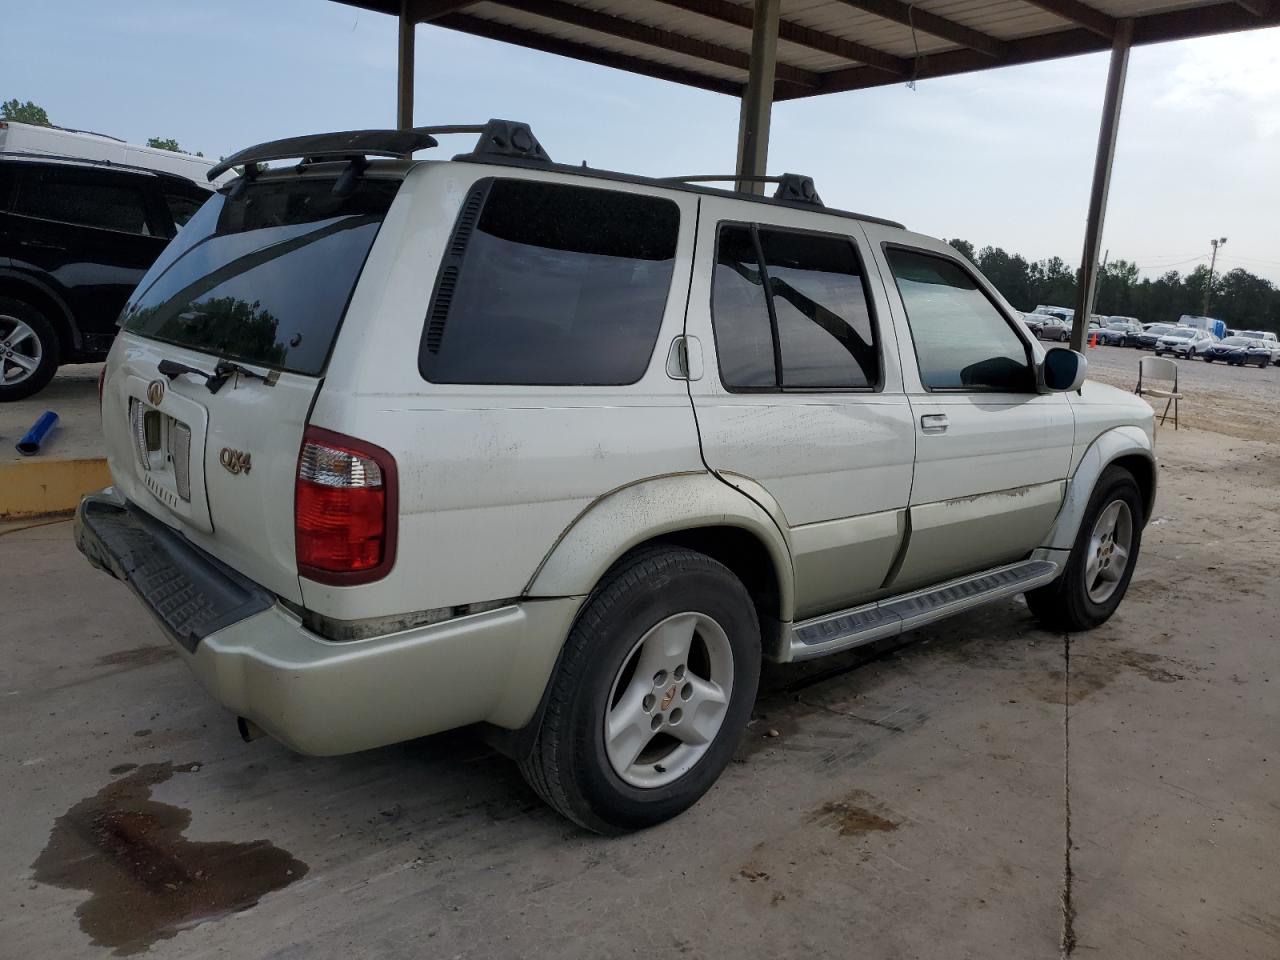 JNRDR09X13W****** Salvage and Repairable 2003 Infiniti QX4 in AL - Hueytown